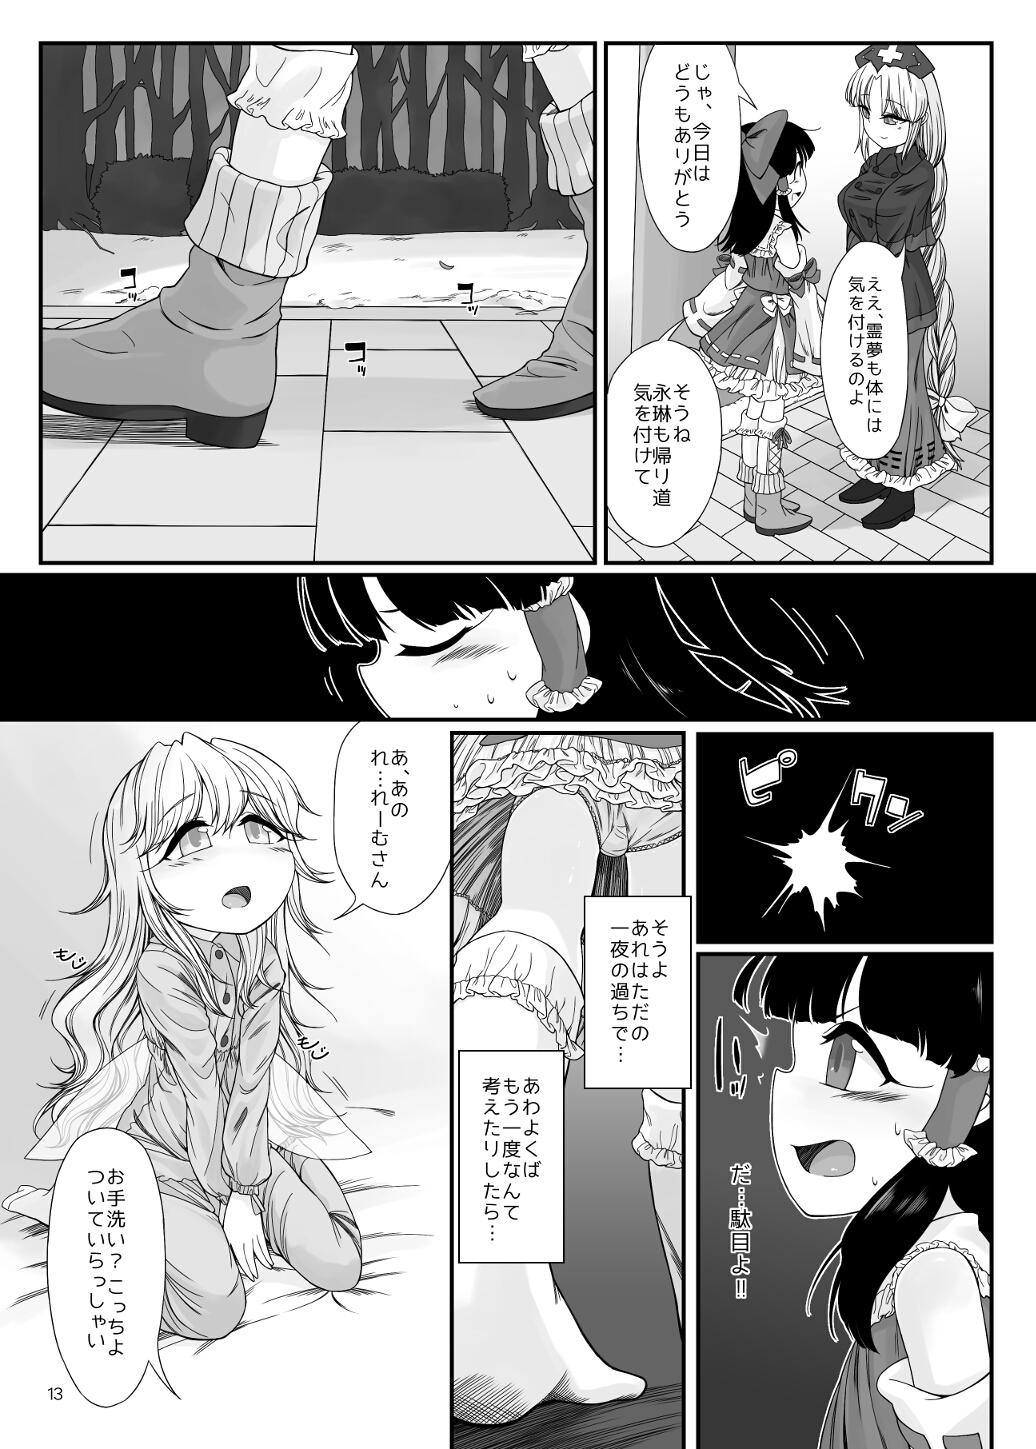 Sexy Girl Sex Onenne Ecchi - Touhou project Reversecowgirl - Page 12